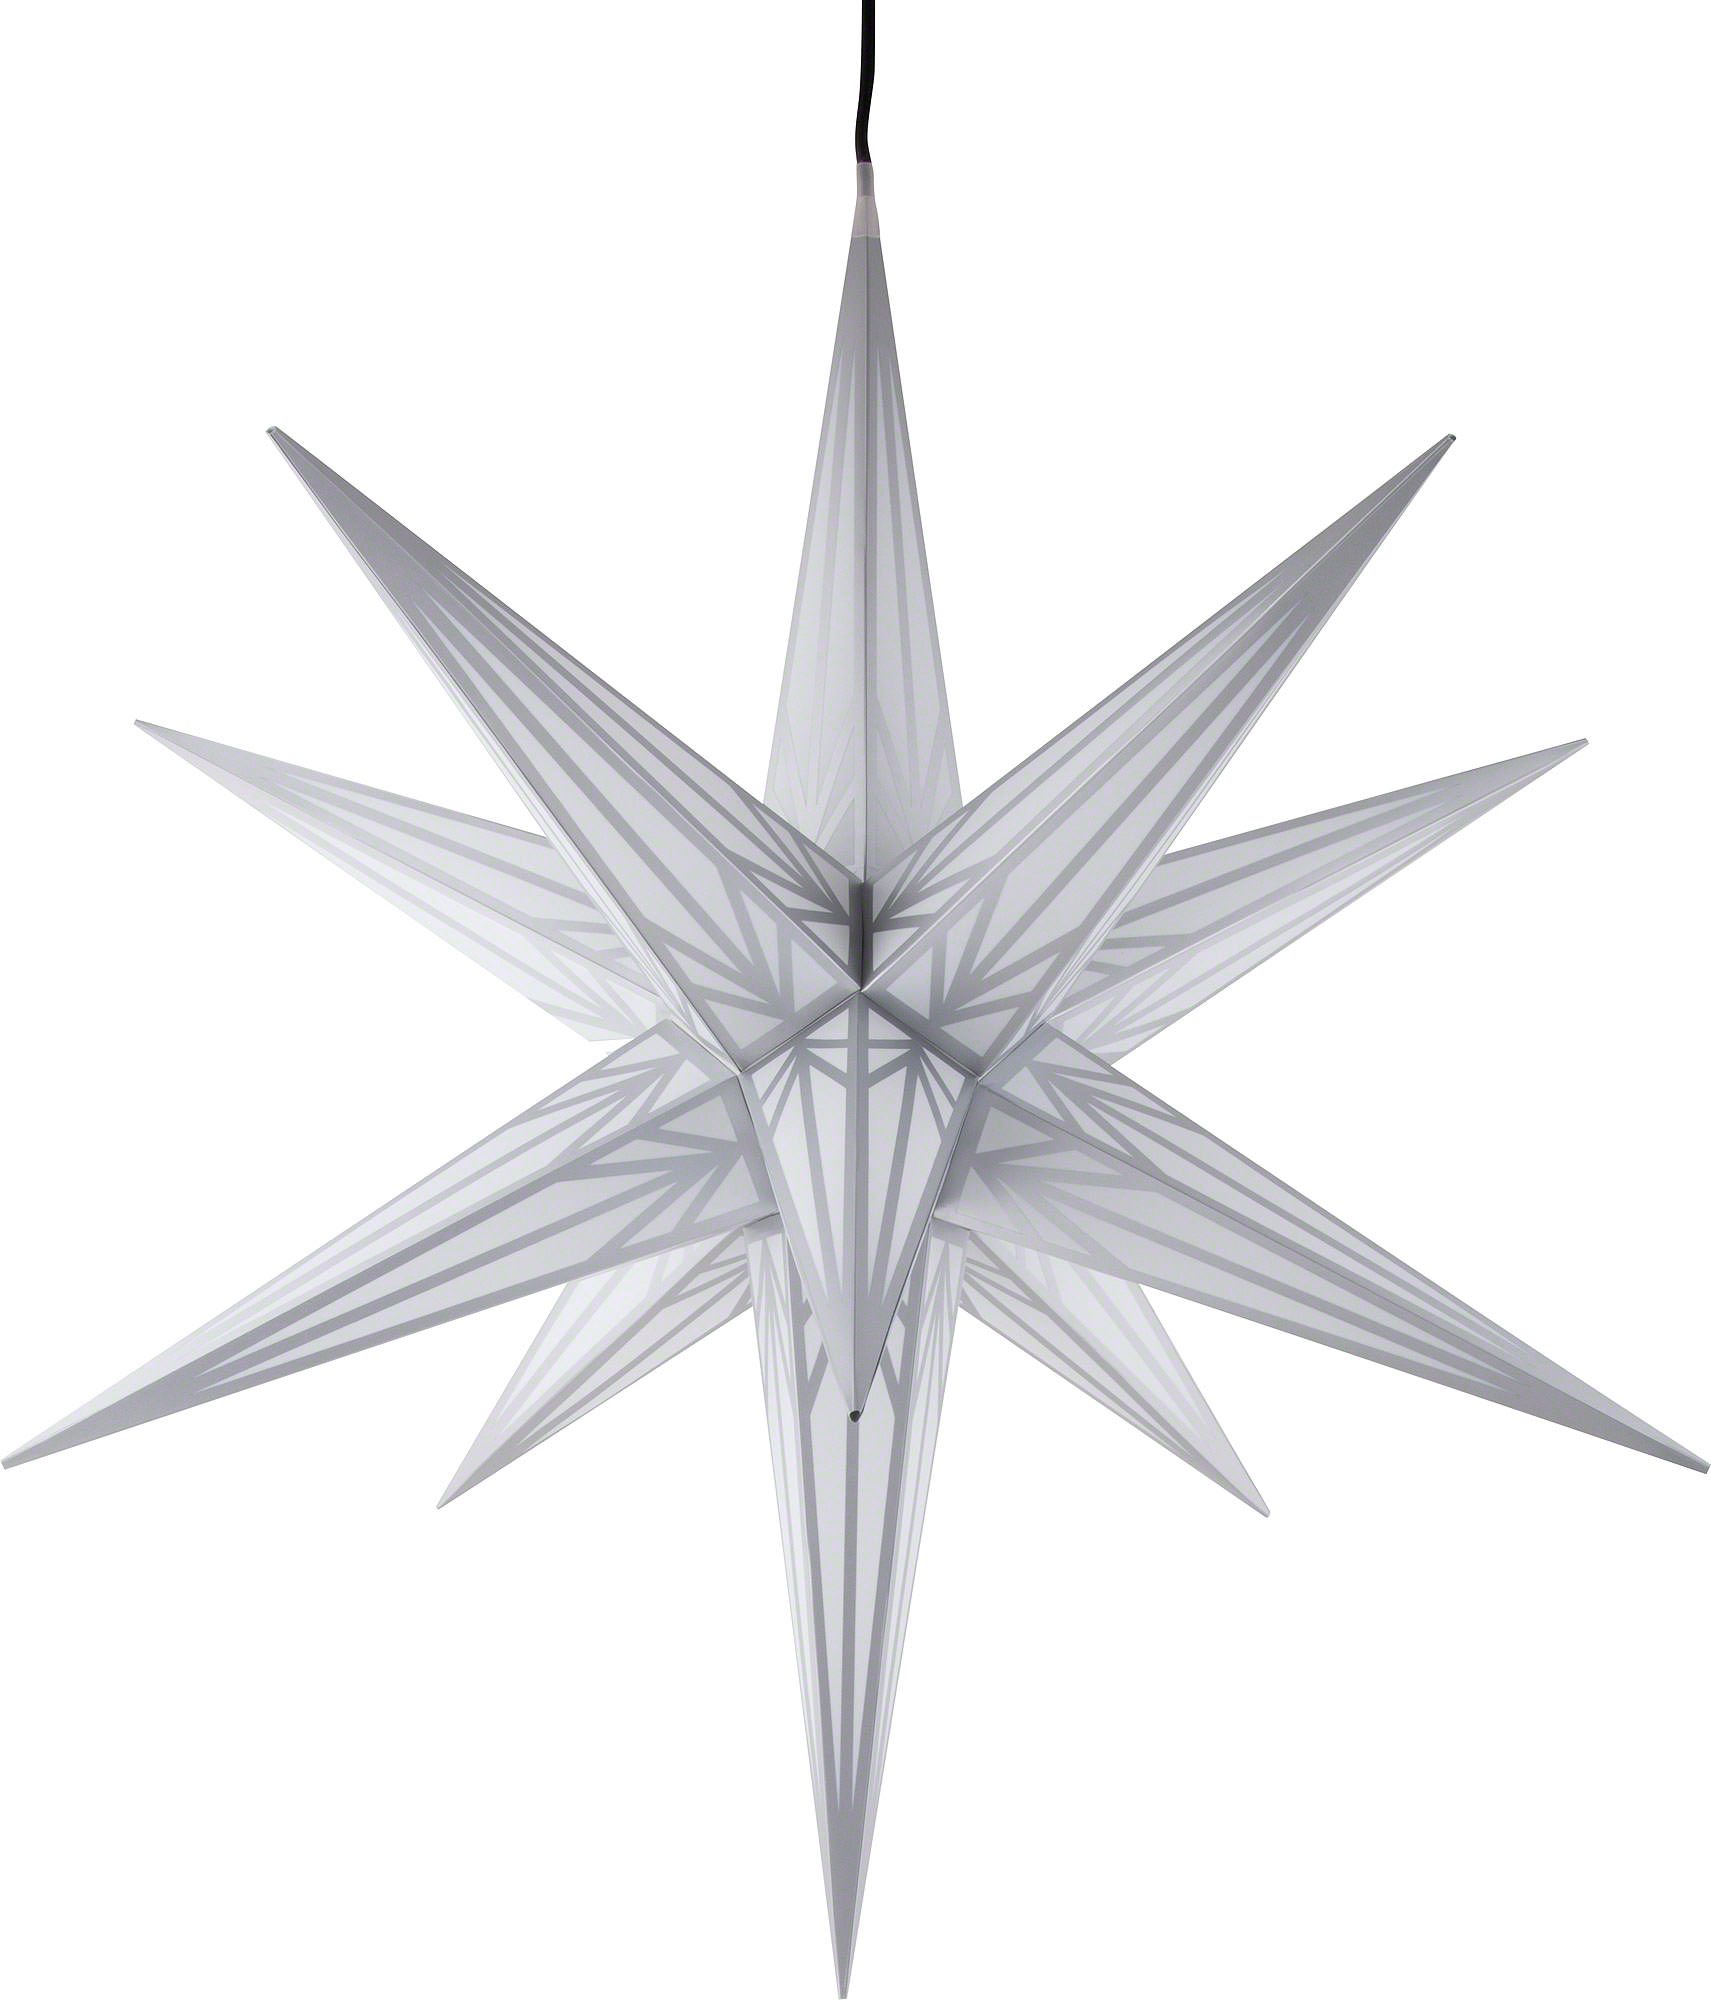 Hasslau Christmas Star for Inside and Outside Use White with Silver ...